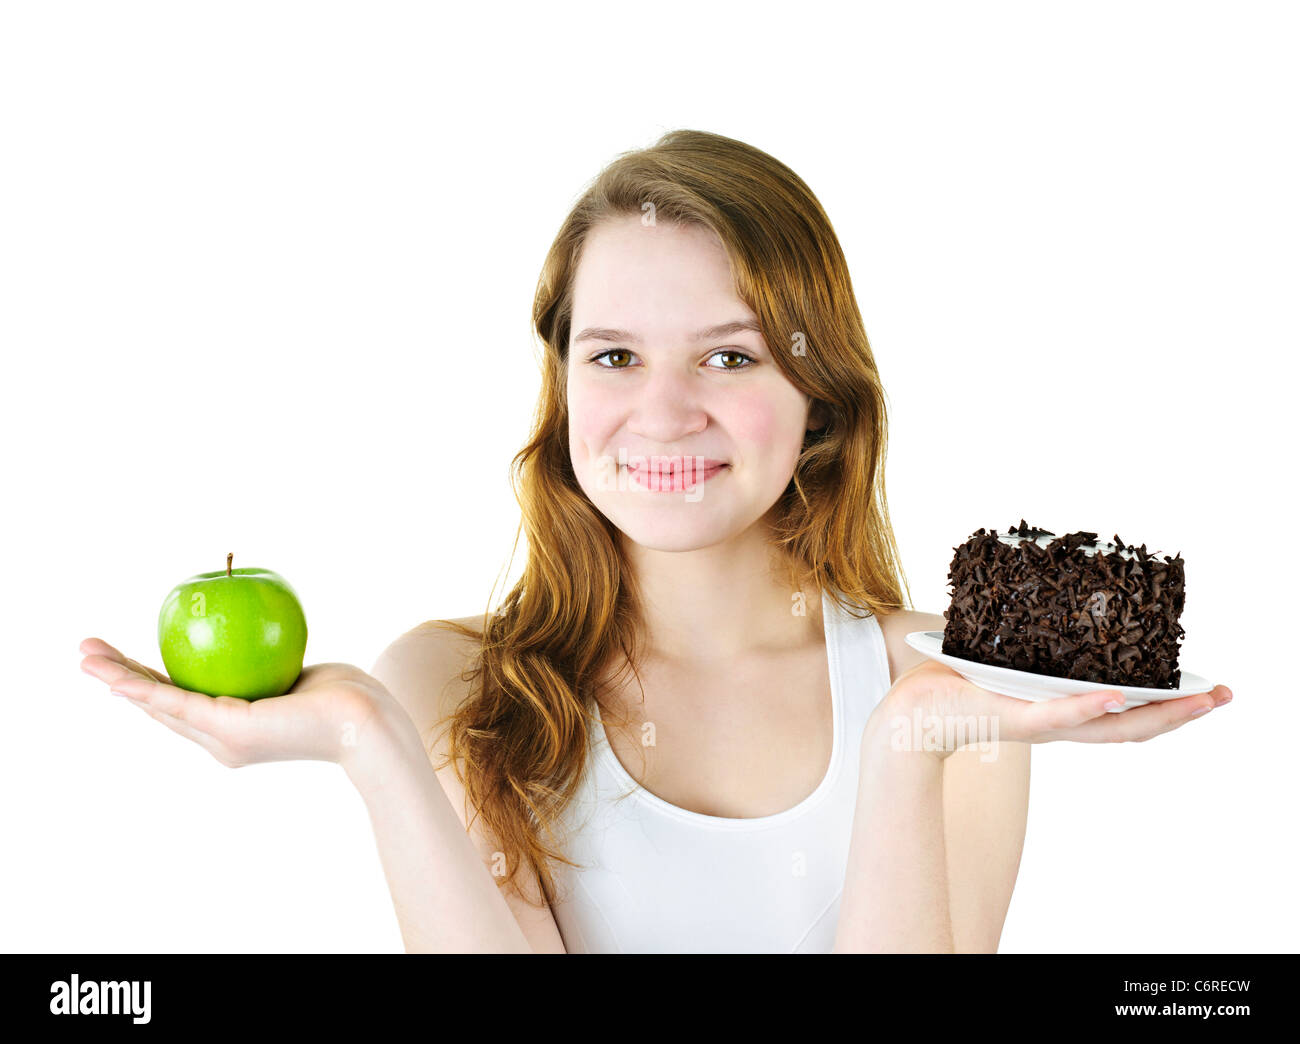 Smiling young woman holding apple and chocolate cake Stock Photo